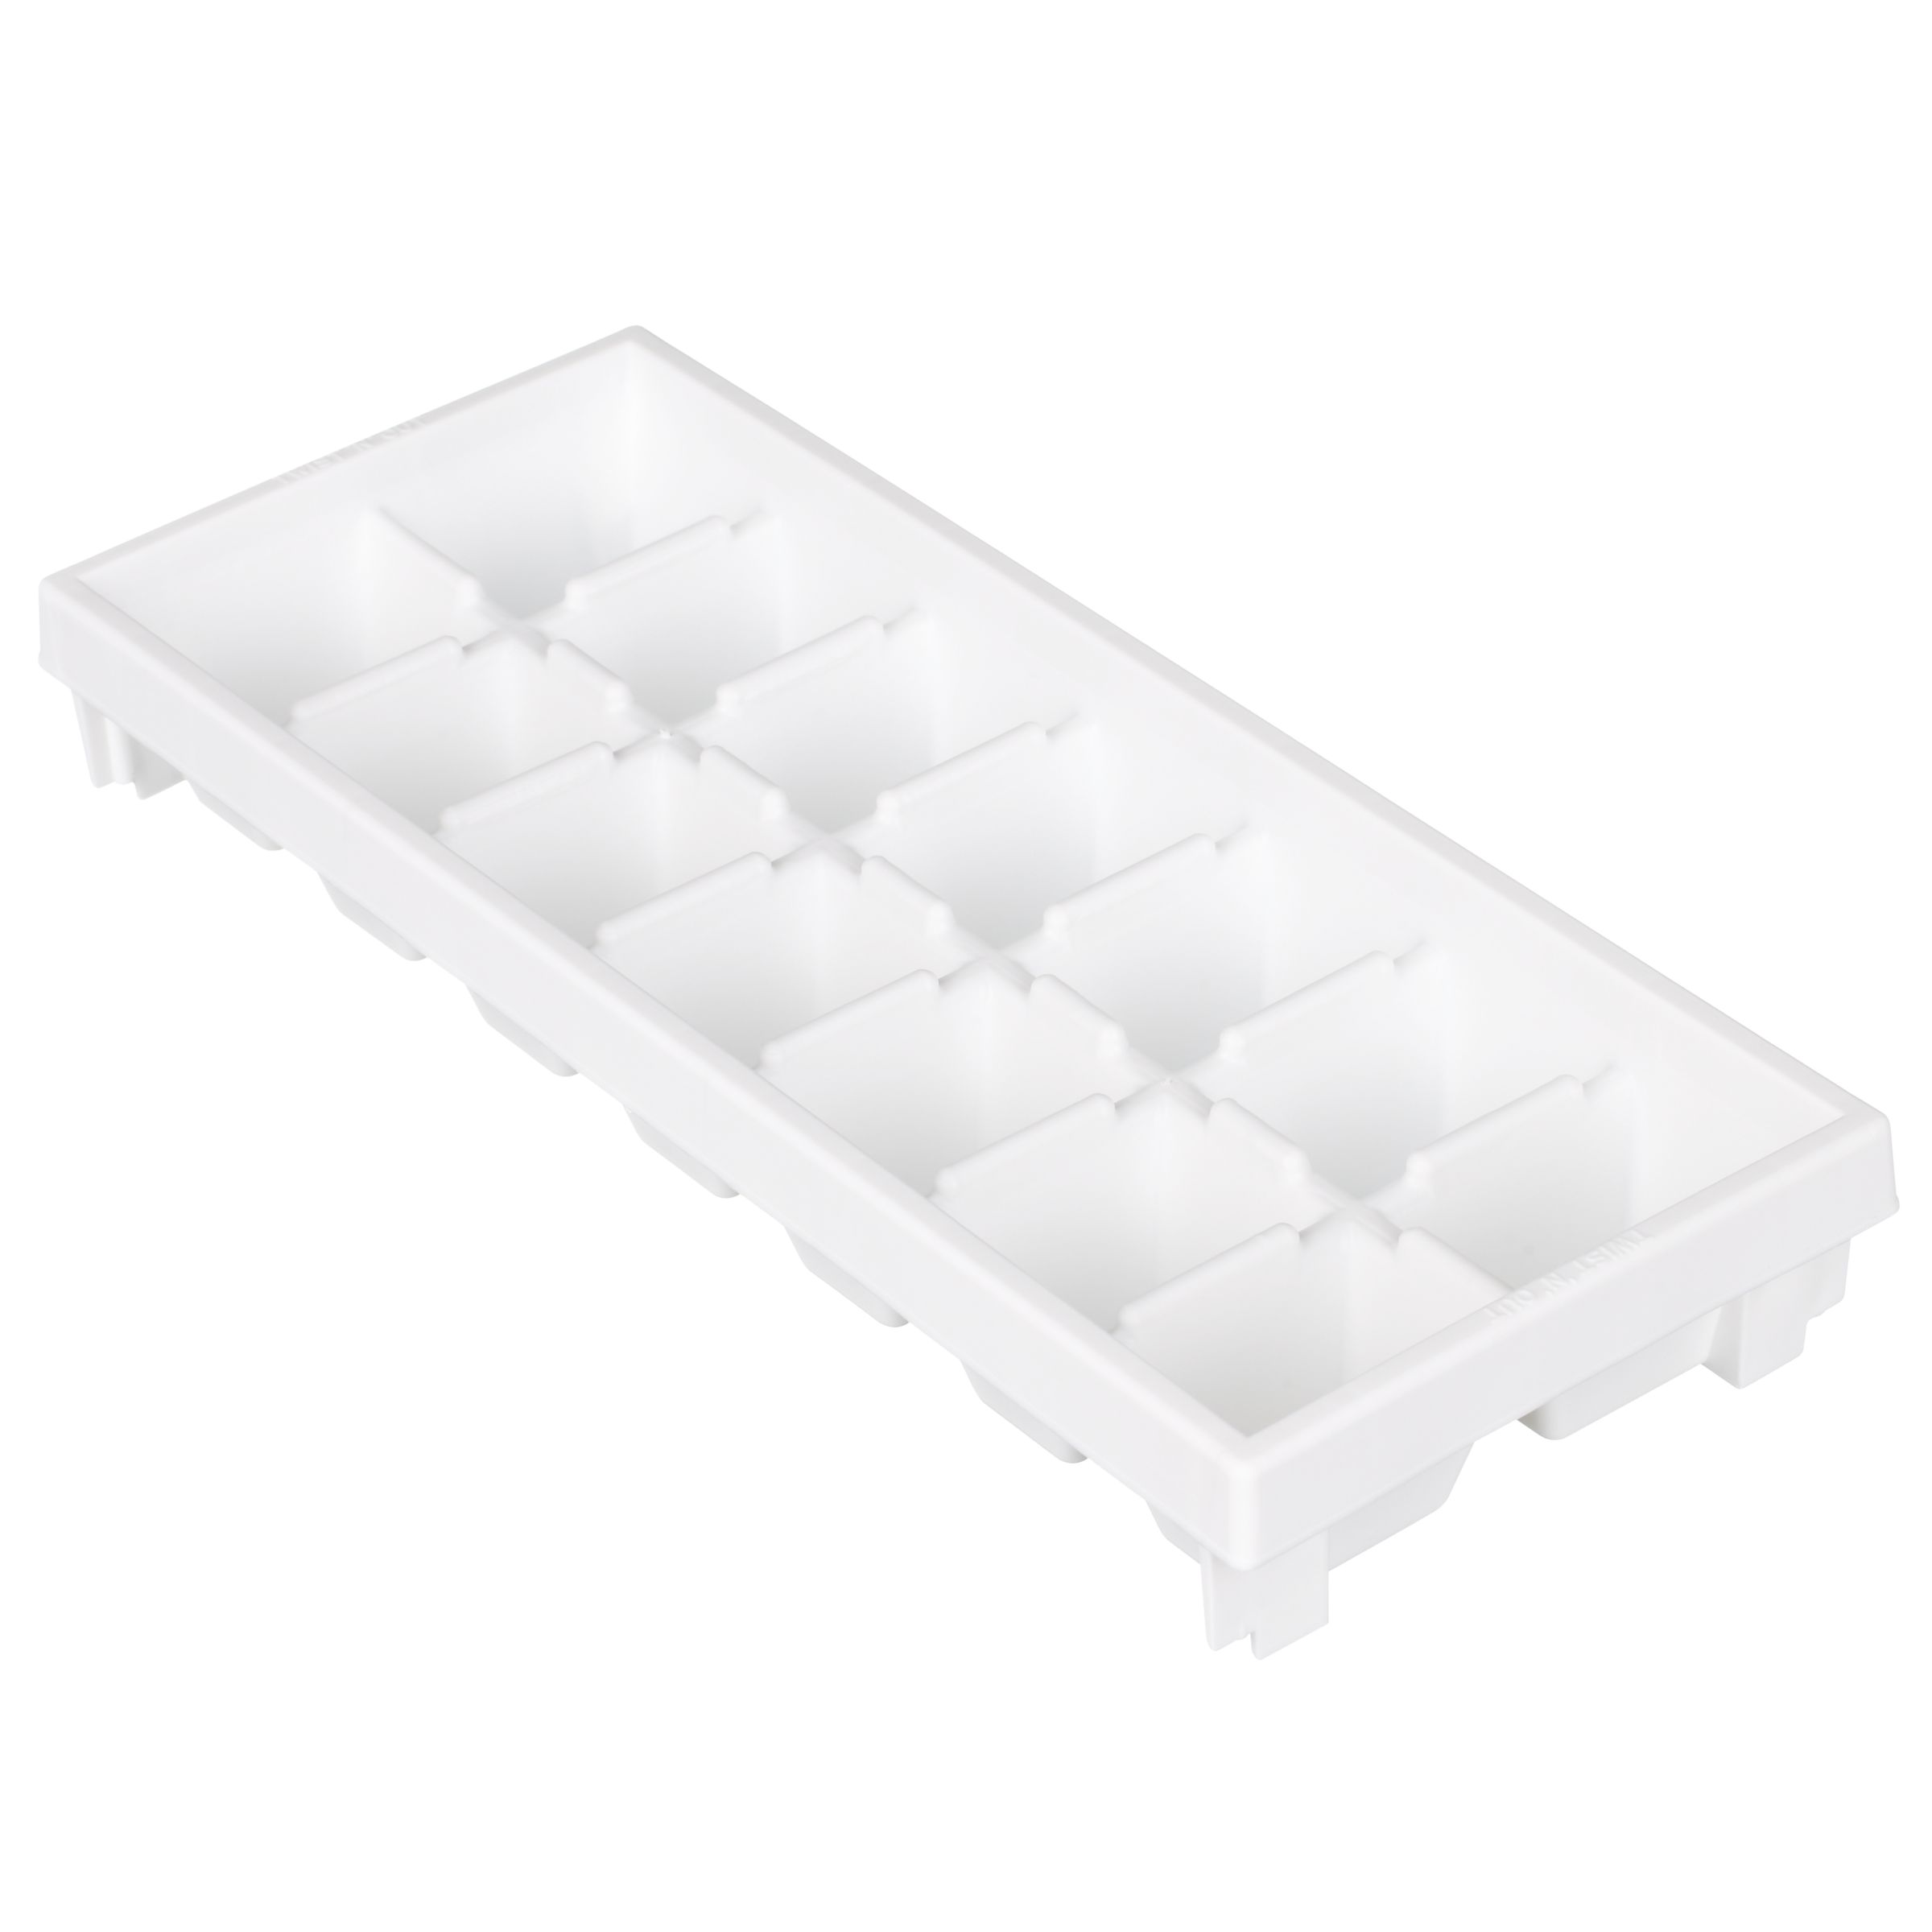 Barcraft Twist n Out Ice Cube Tray